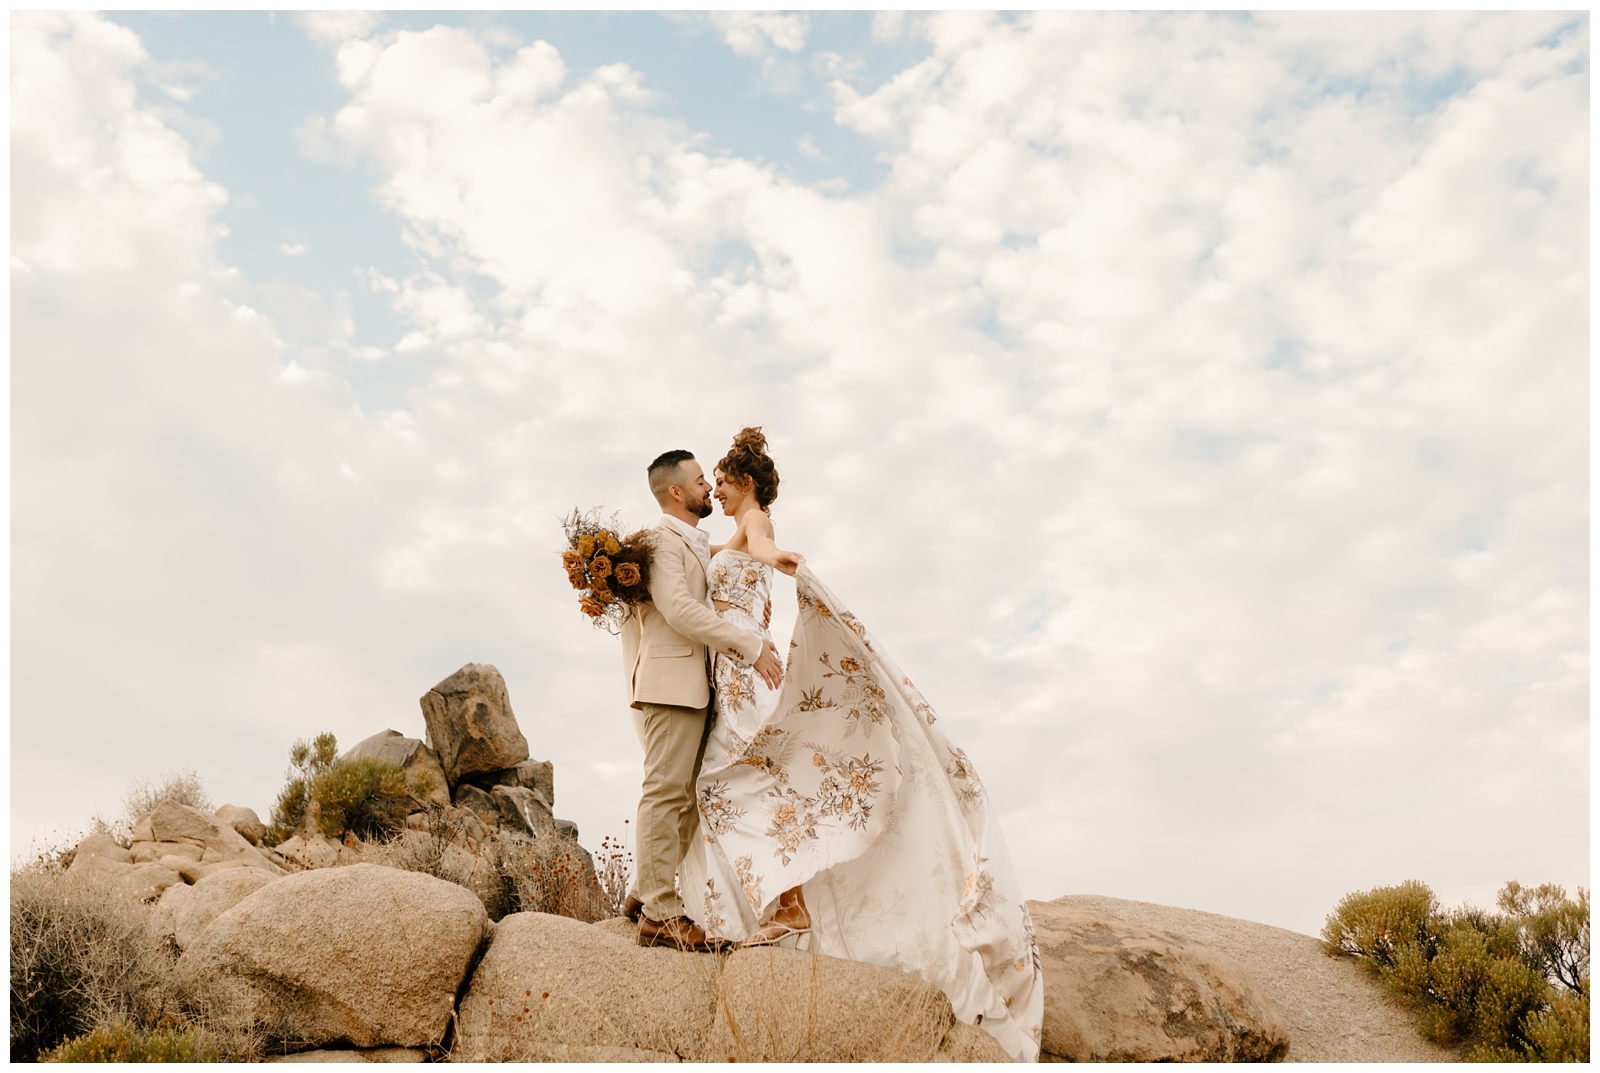 Bride's non traditional dress and bouquet for an indie chic elopement in Joshua Tree, adventurous couple portraits by destination wedding photographer